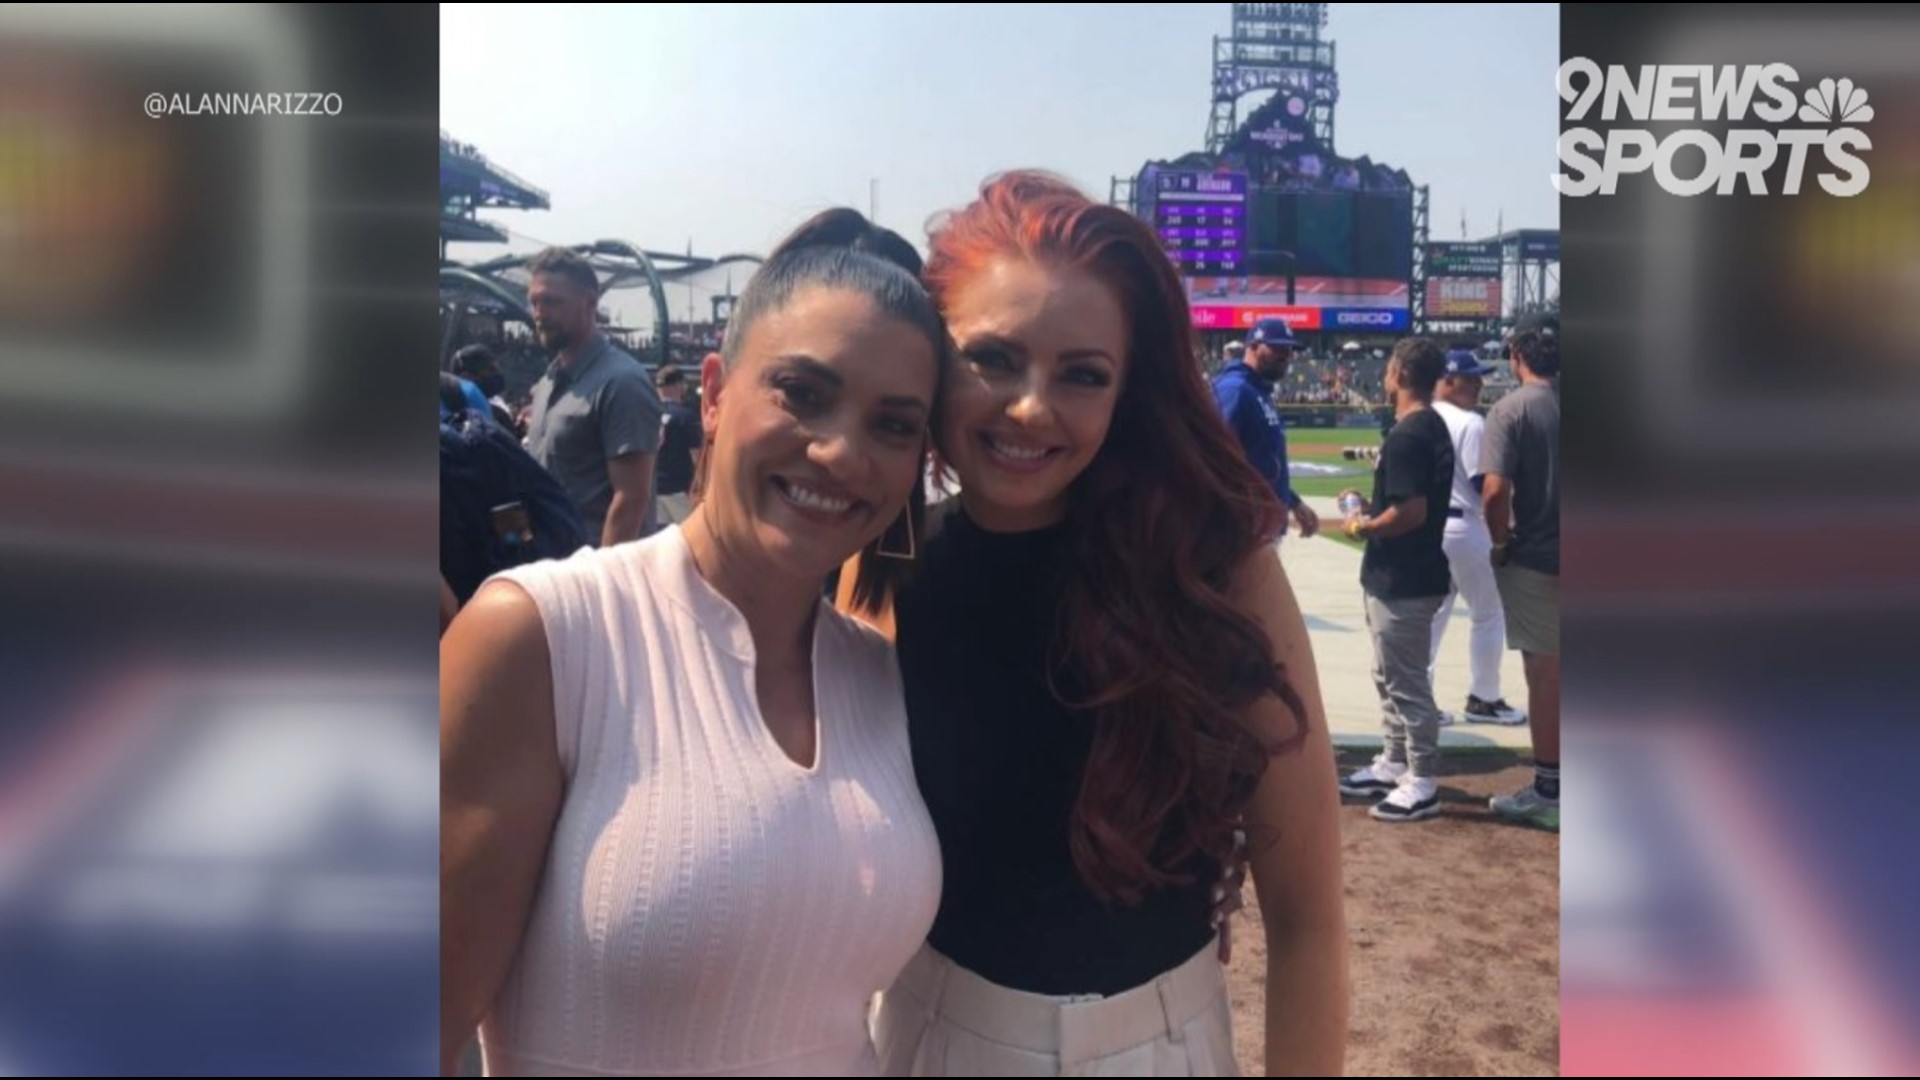 Alanna Rizzo and Lauren Gardner will be part of the first all-female crew to call a Major League Baseball game on Tuesday night.